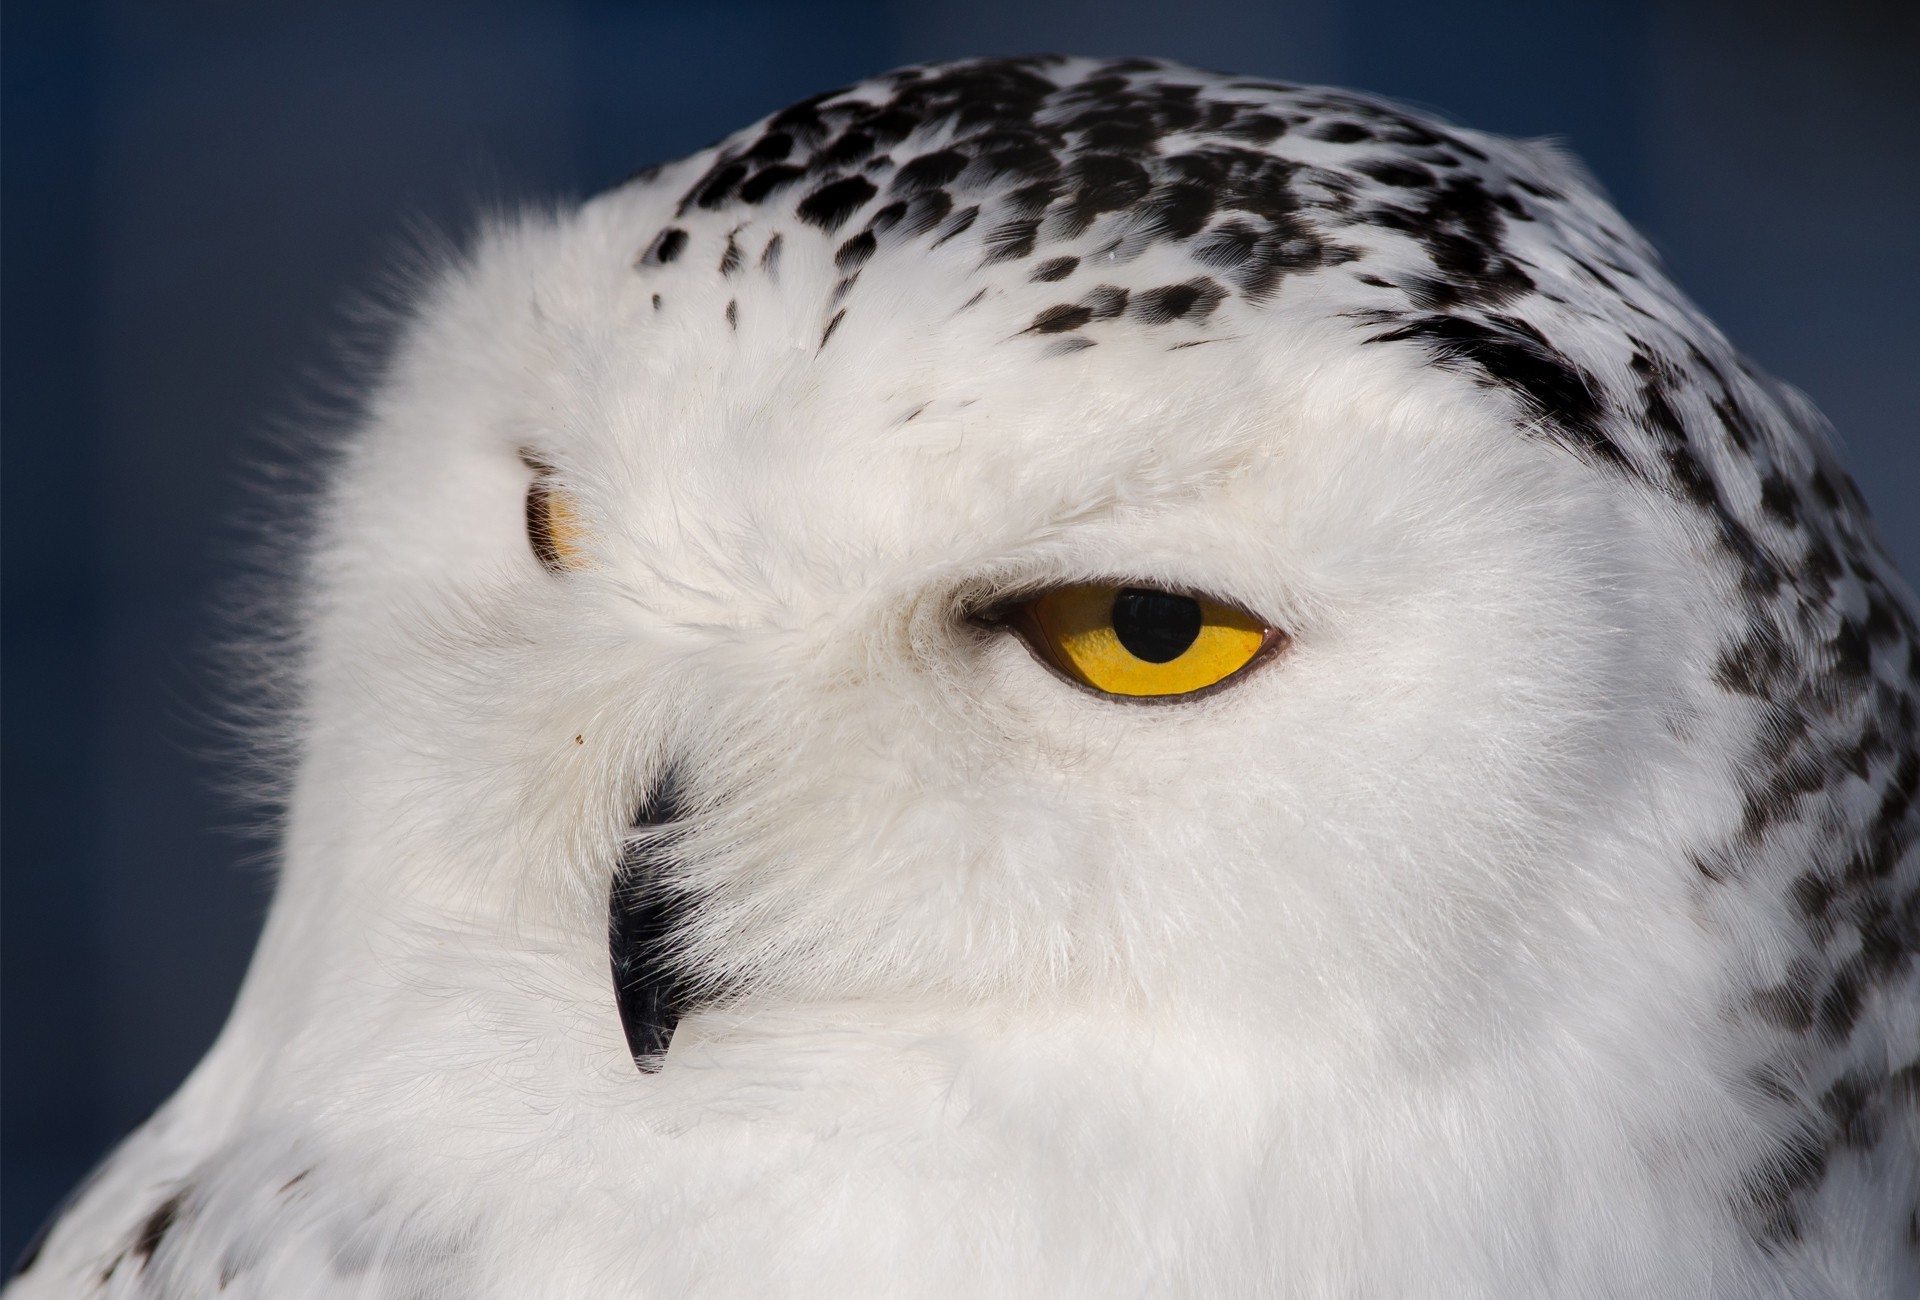 A white owl with bright yellow eyes